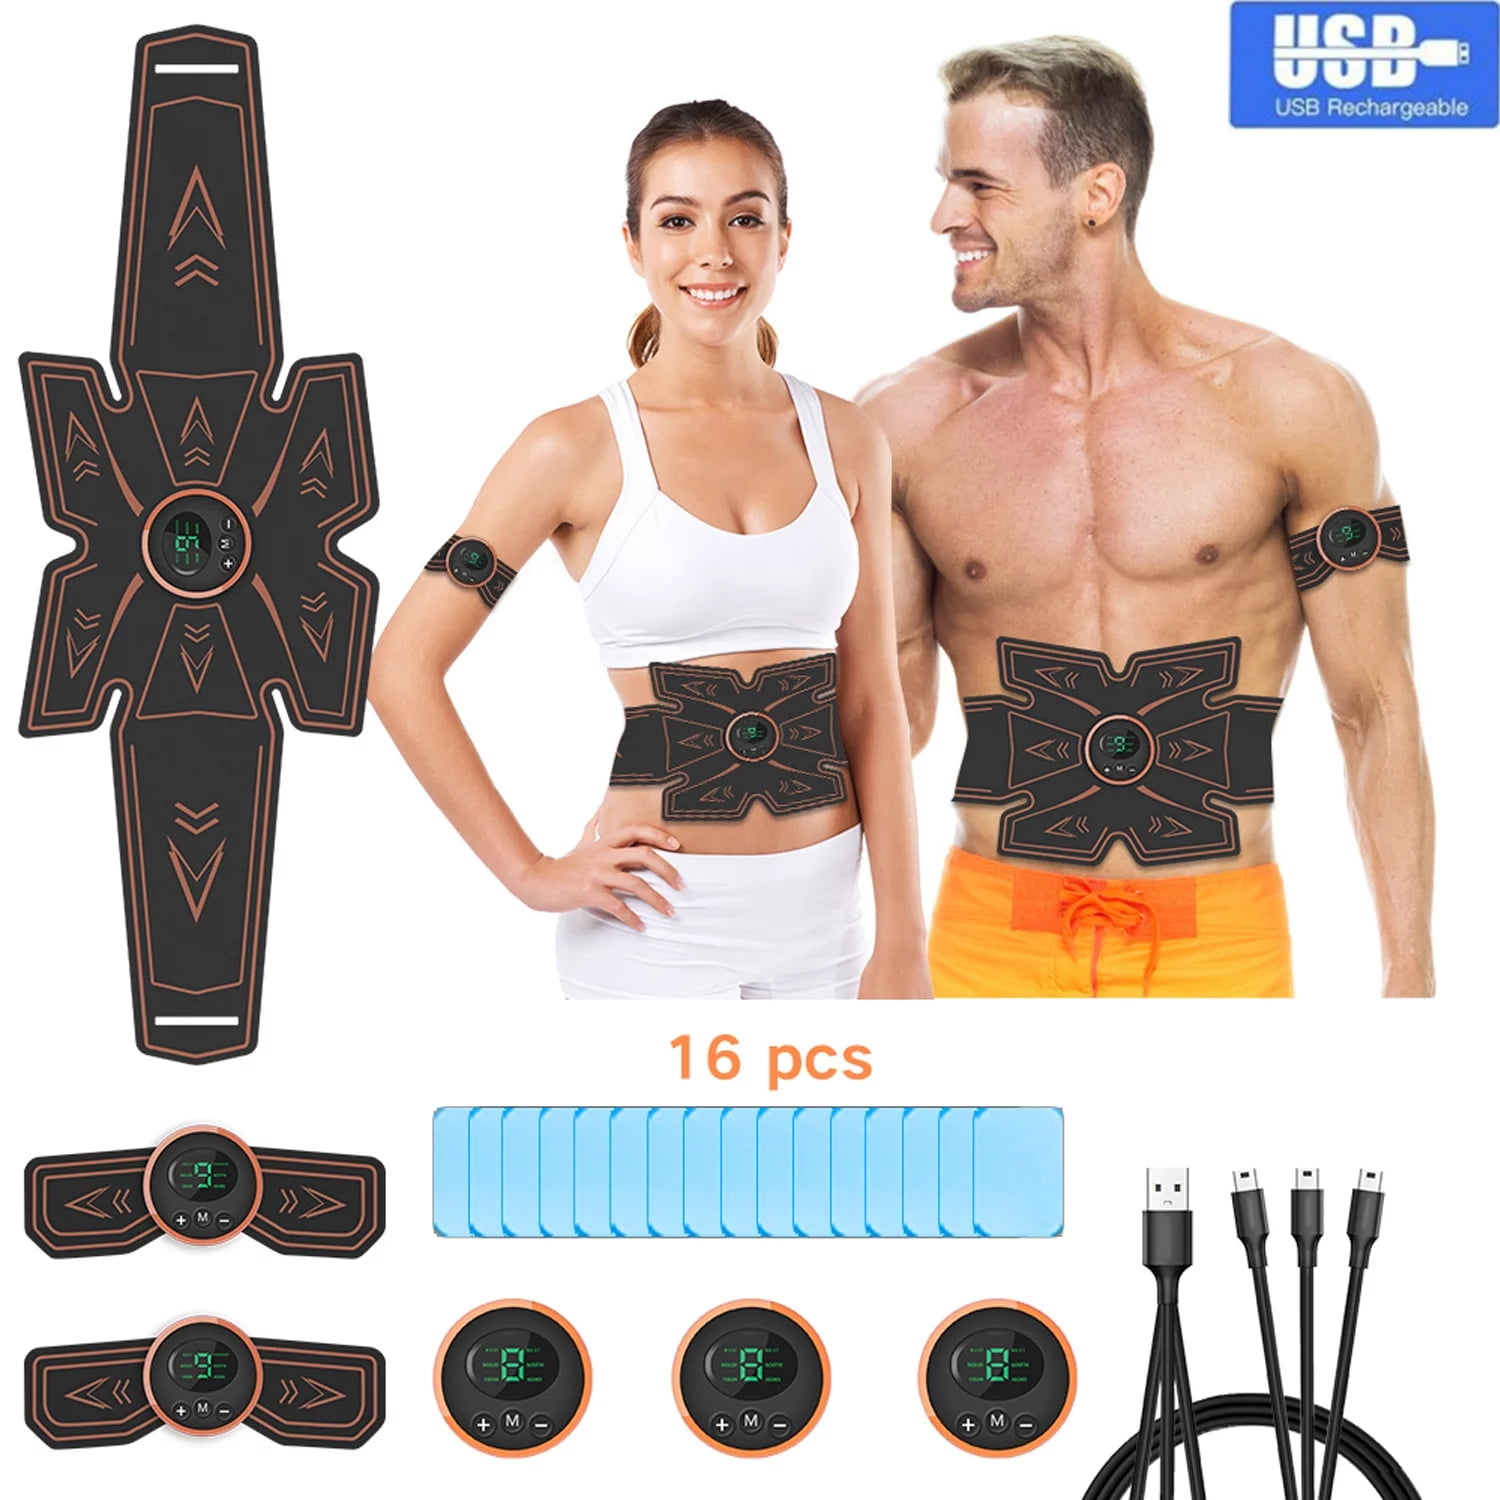 Ifanze Abs Stimulator, Ab Stimulator, Rechargeable Ultimate Muscle ...